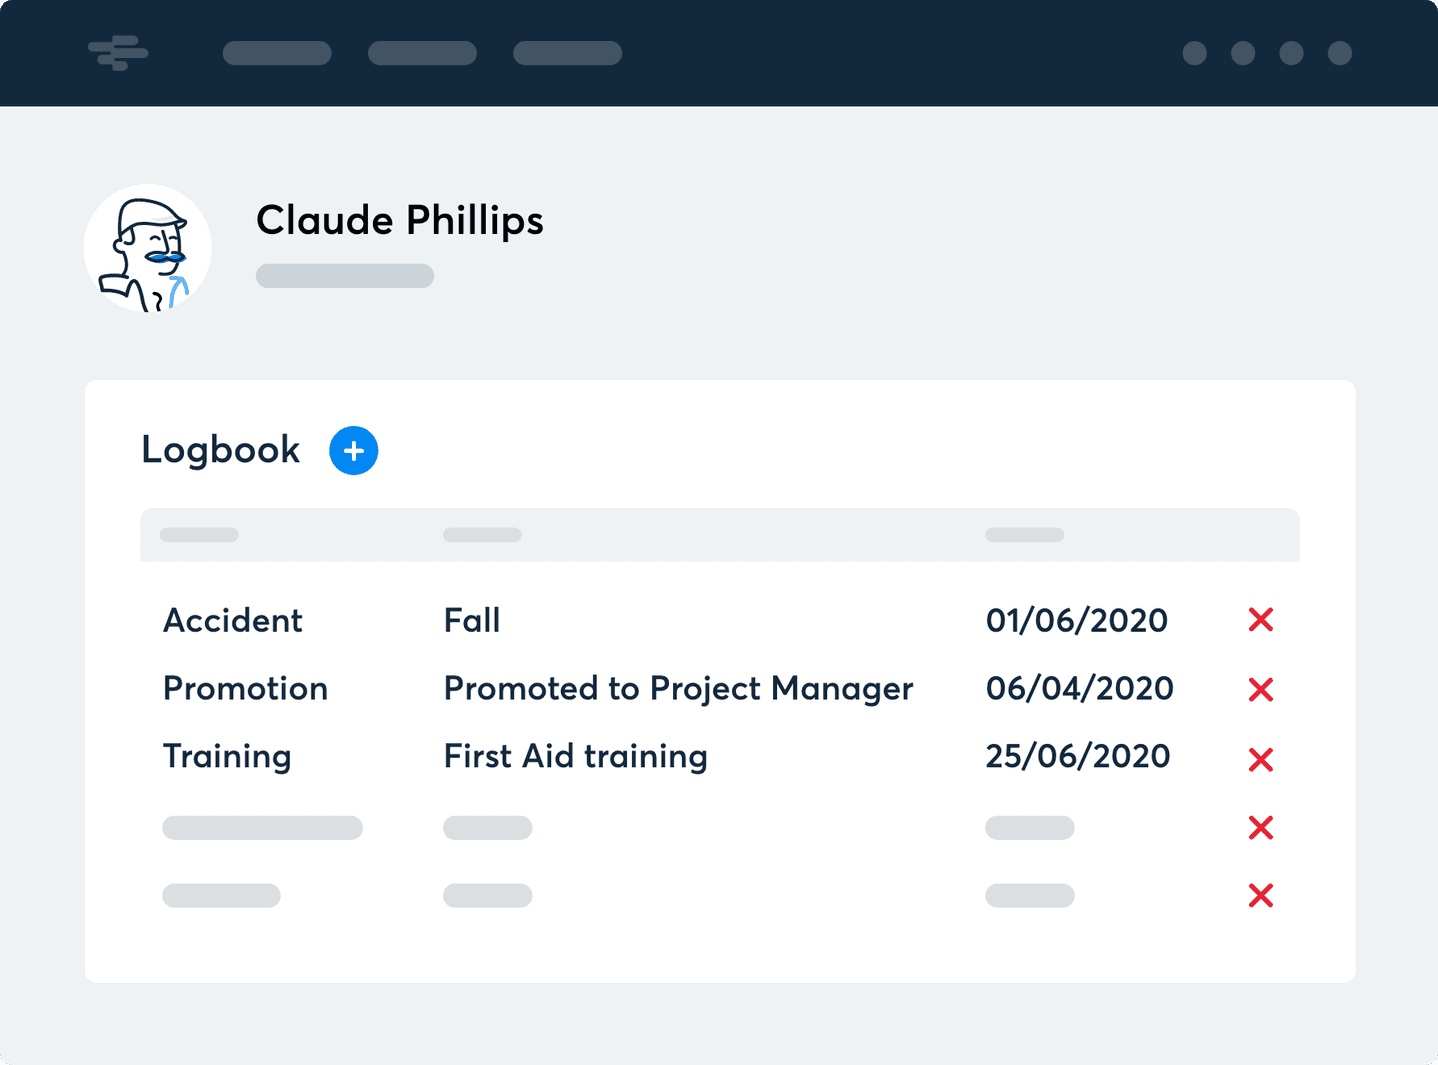 Event logbook in RotaCloud, showing accident, training, and promotion entries.